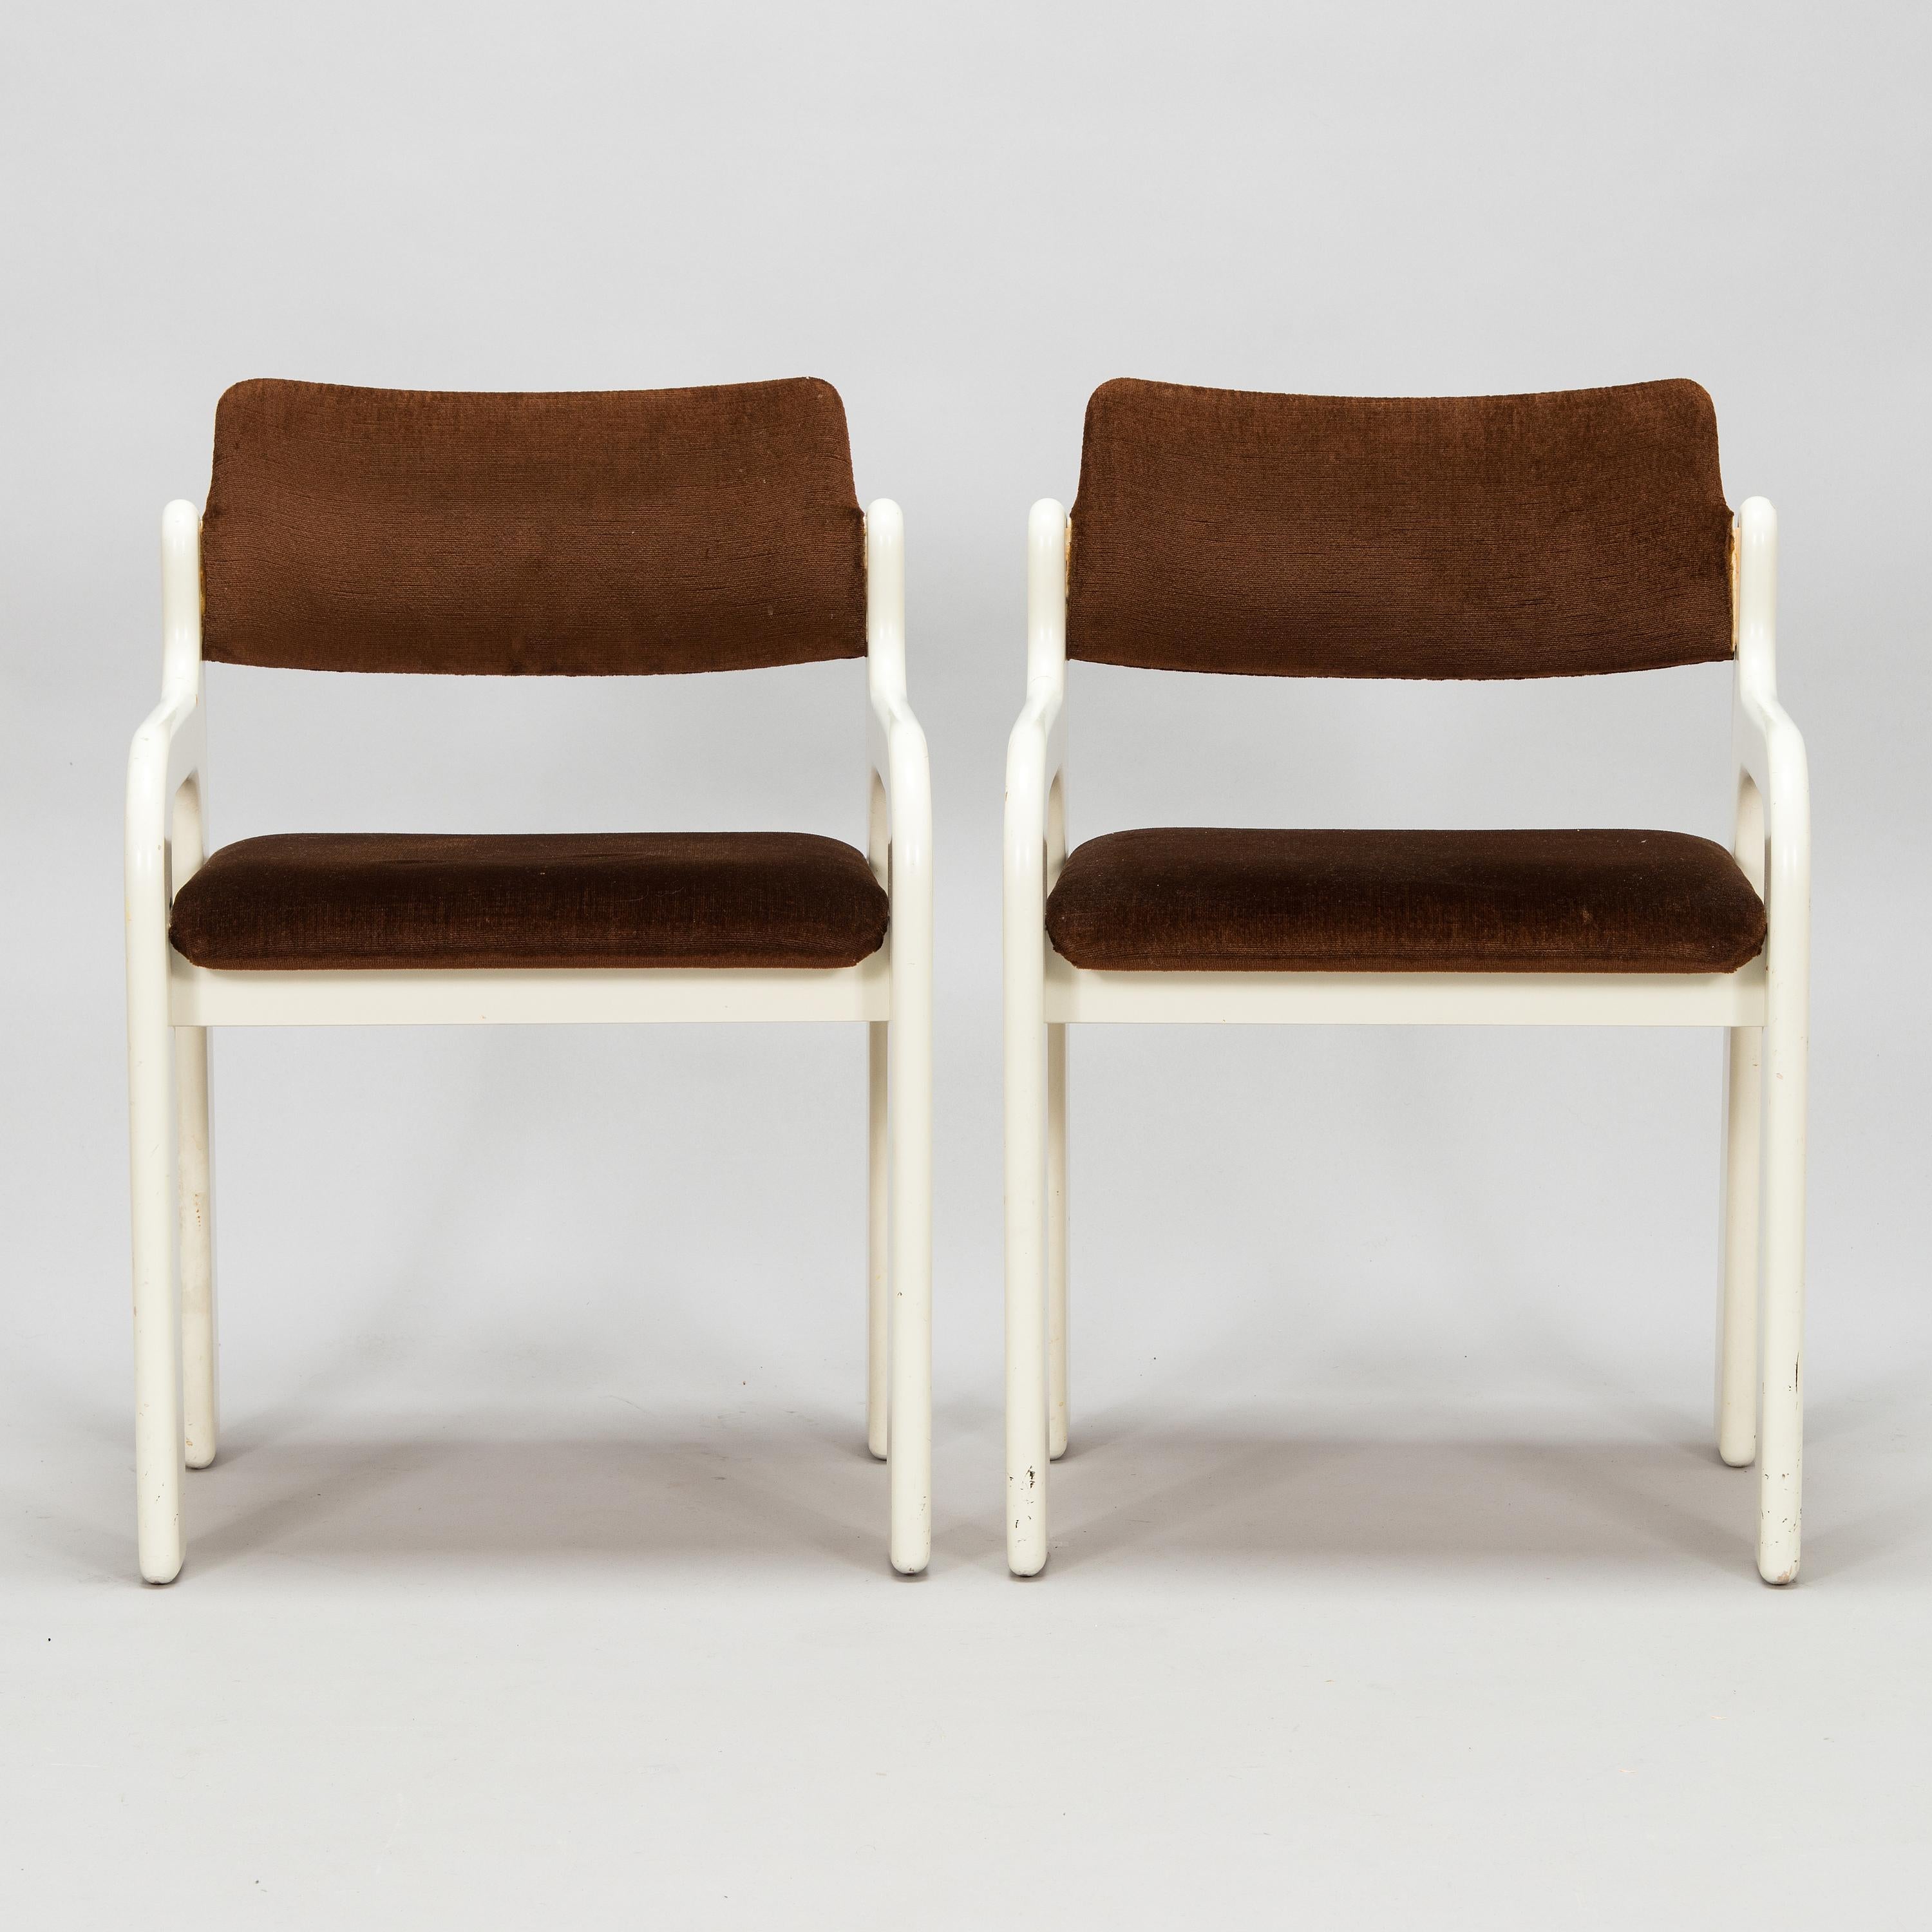 Eero Aarnio 4 Chairs Model Flamingo for Asko Finland Marked, 1970s  In Fair Condition For Sale In Paris, FR